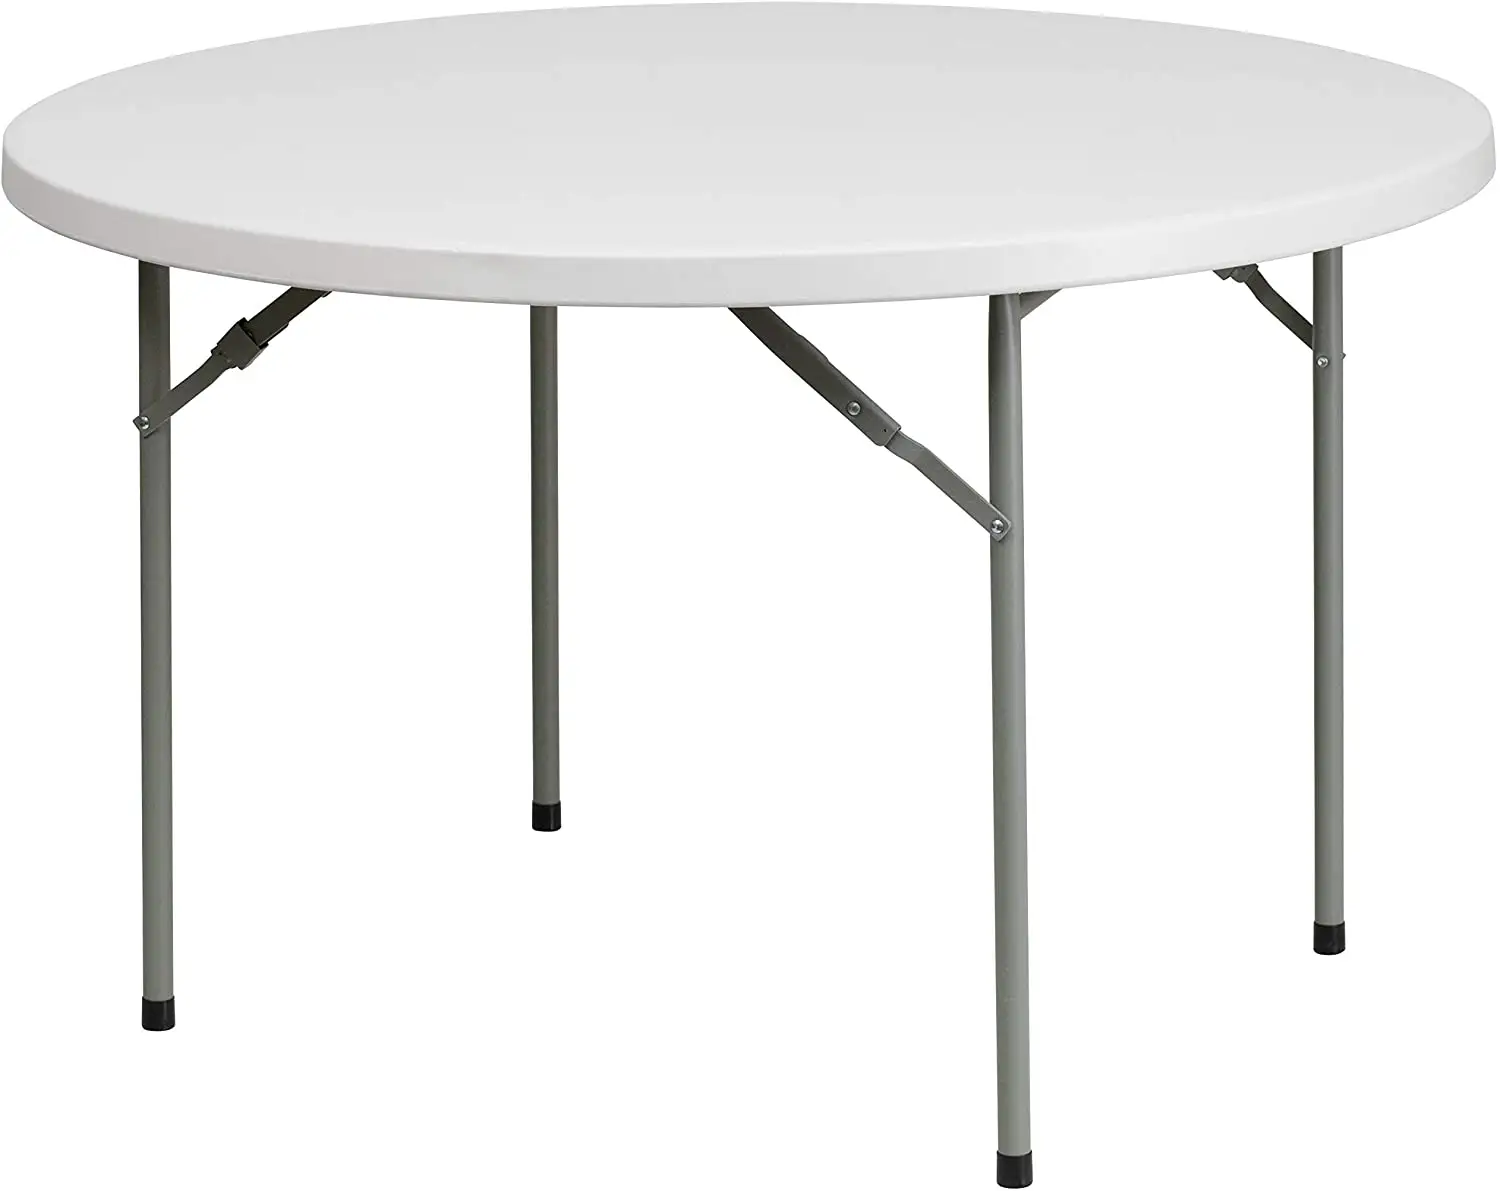 Hot Sale Best Price 31.5 Inch Picnic Outdoor Round Folding Plastic Lightweight Tables And Chair For Events